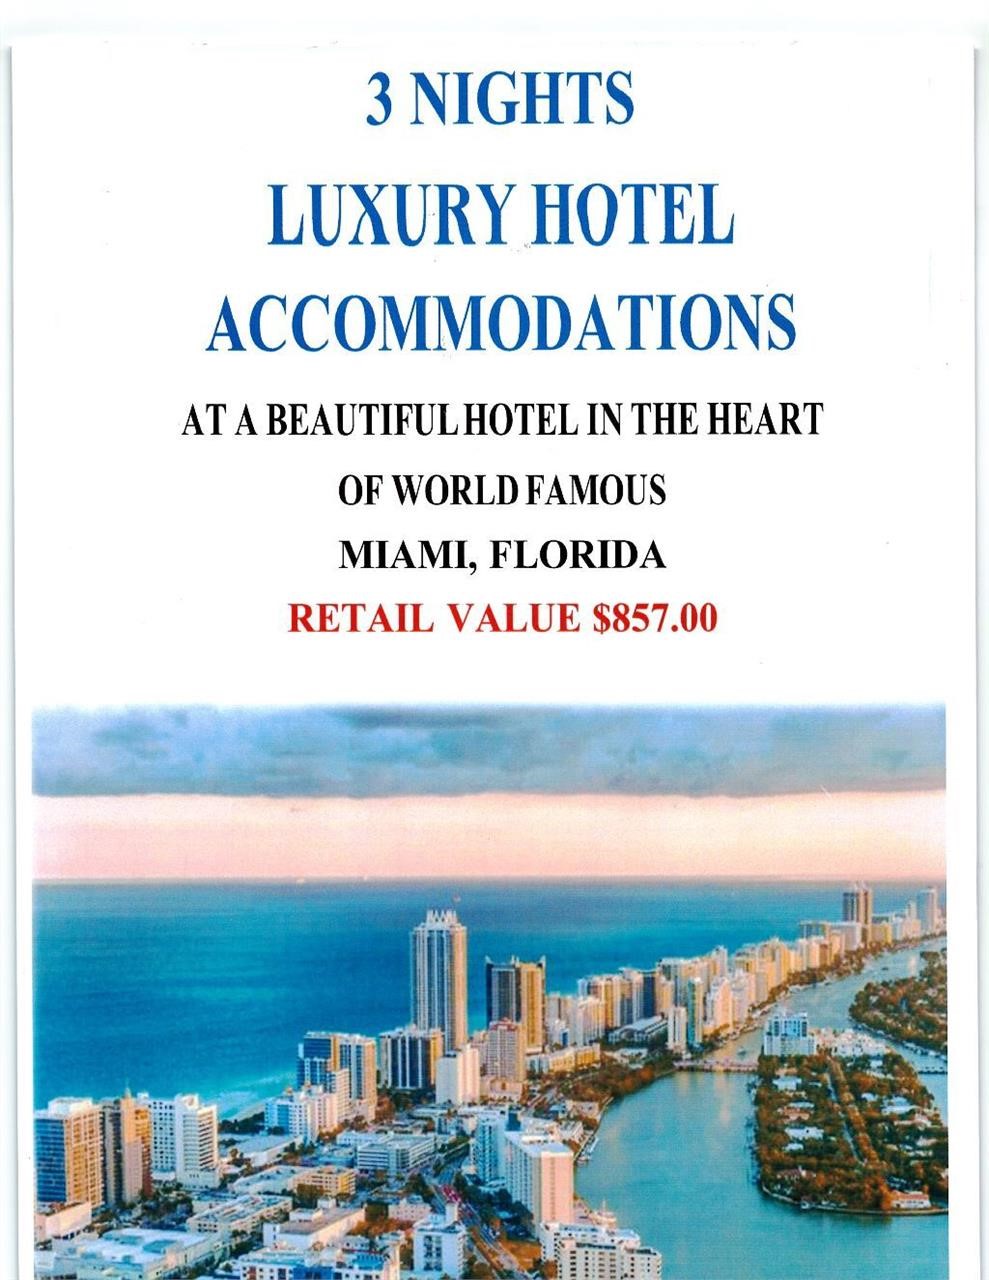 April 20Th. Vacation Hotel Accommodation Packages Auction